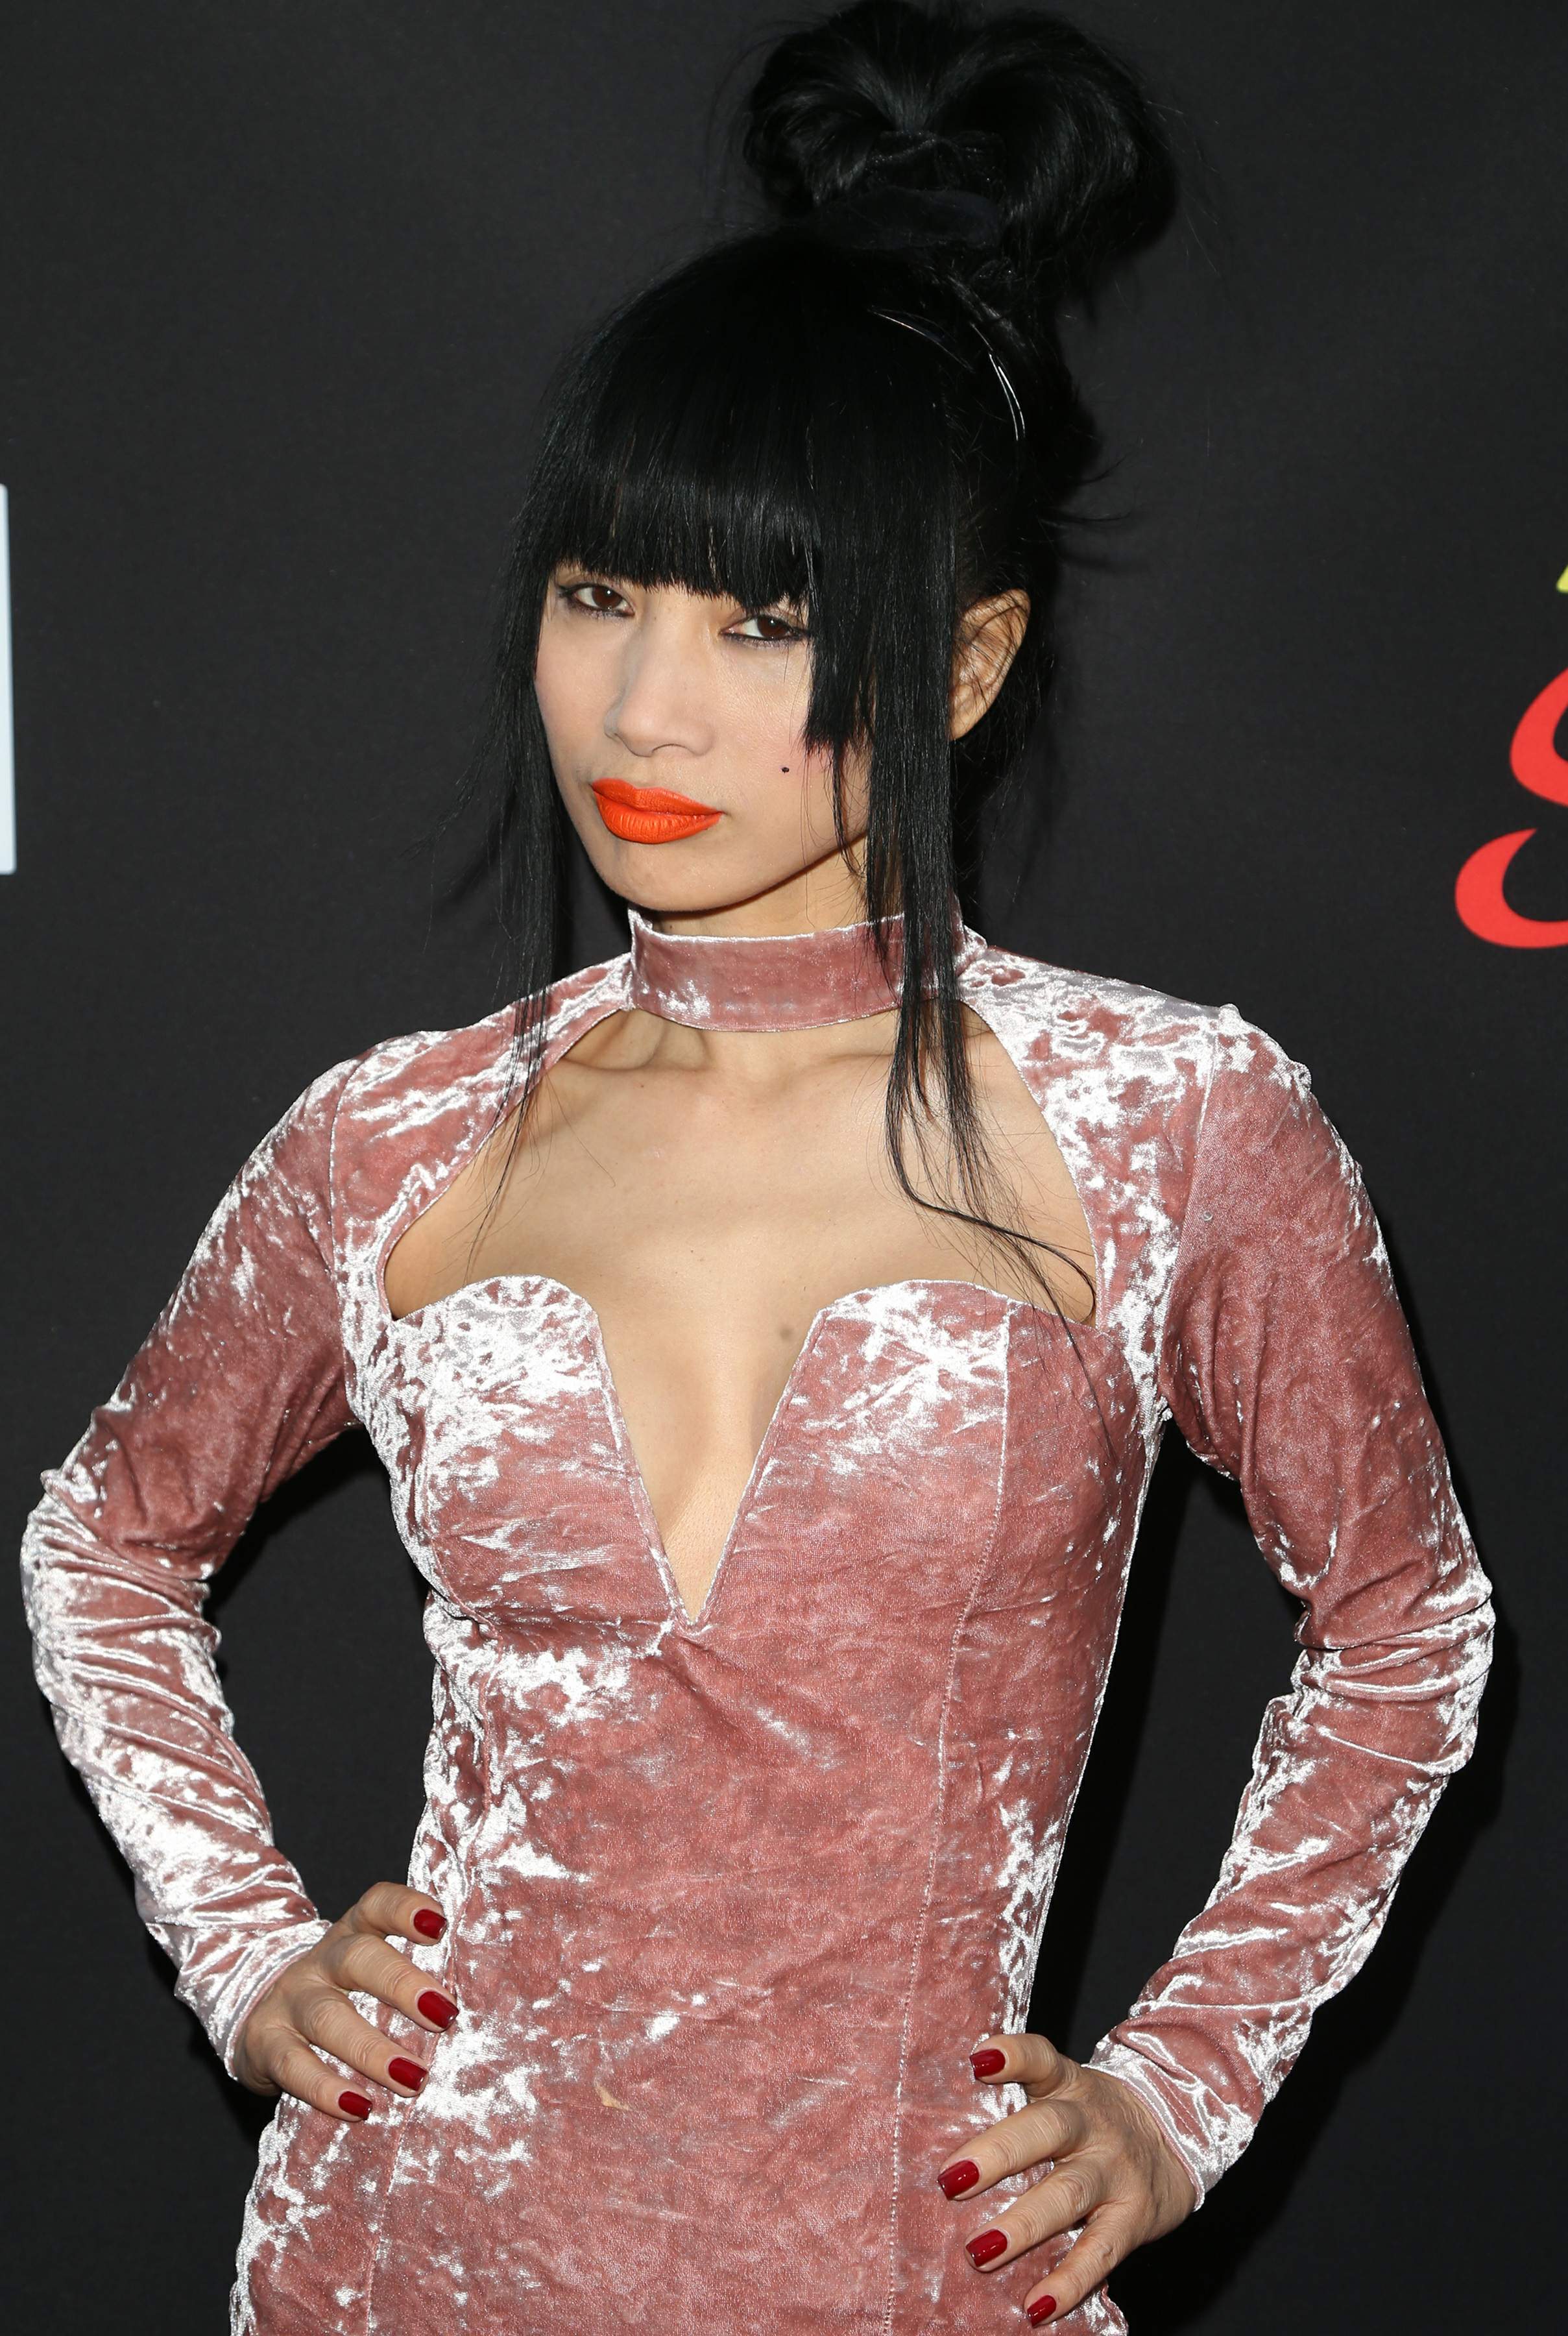 Bai Ling Wearing The Tightest Dress Ever #79507264